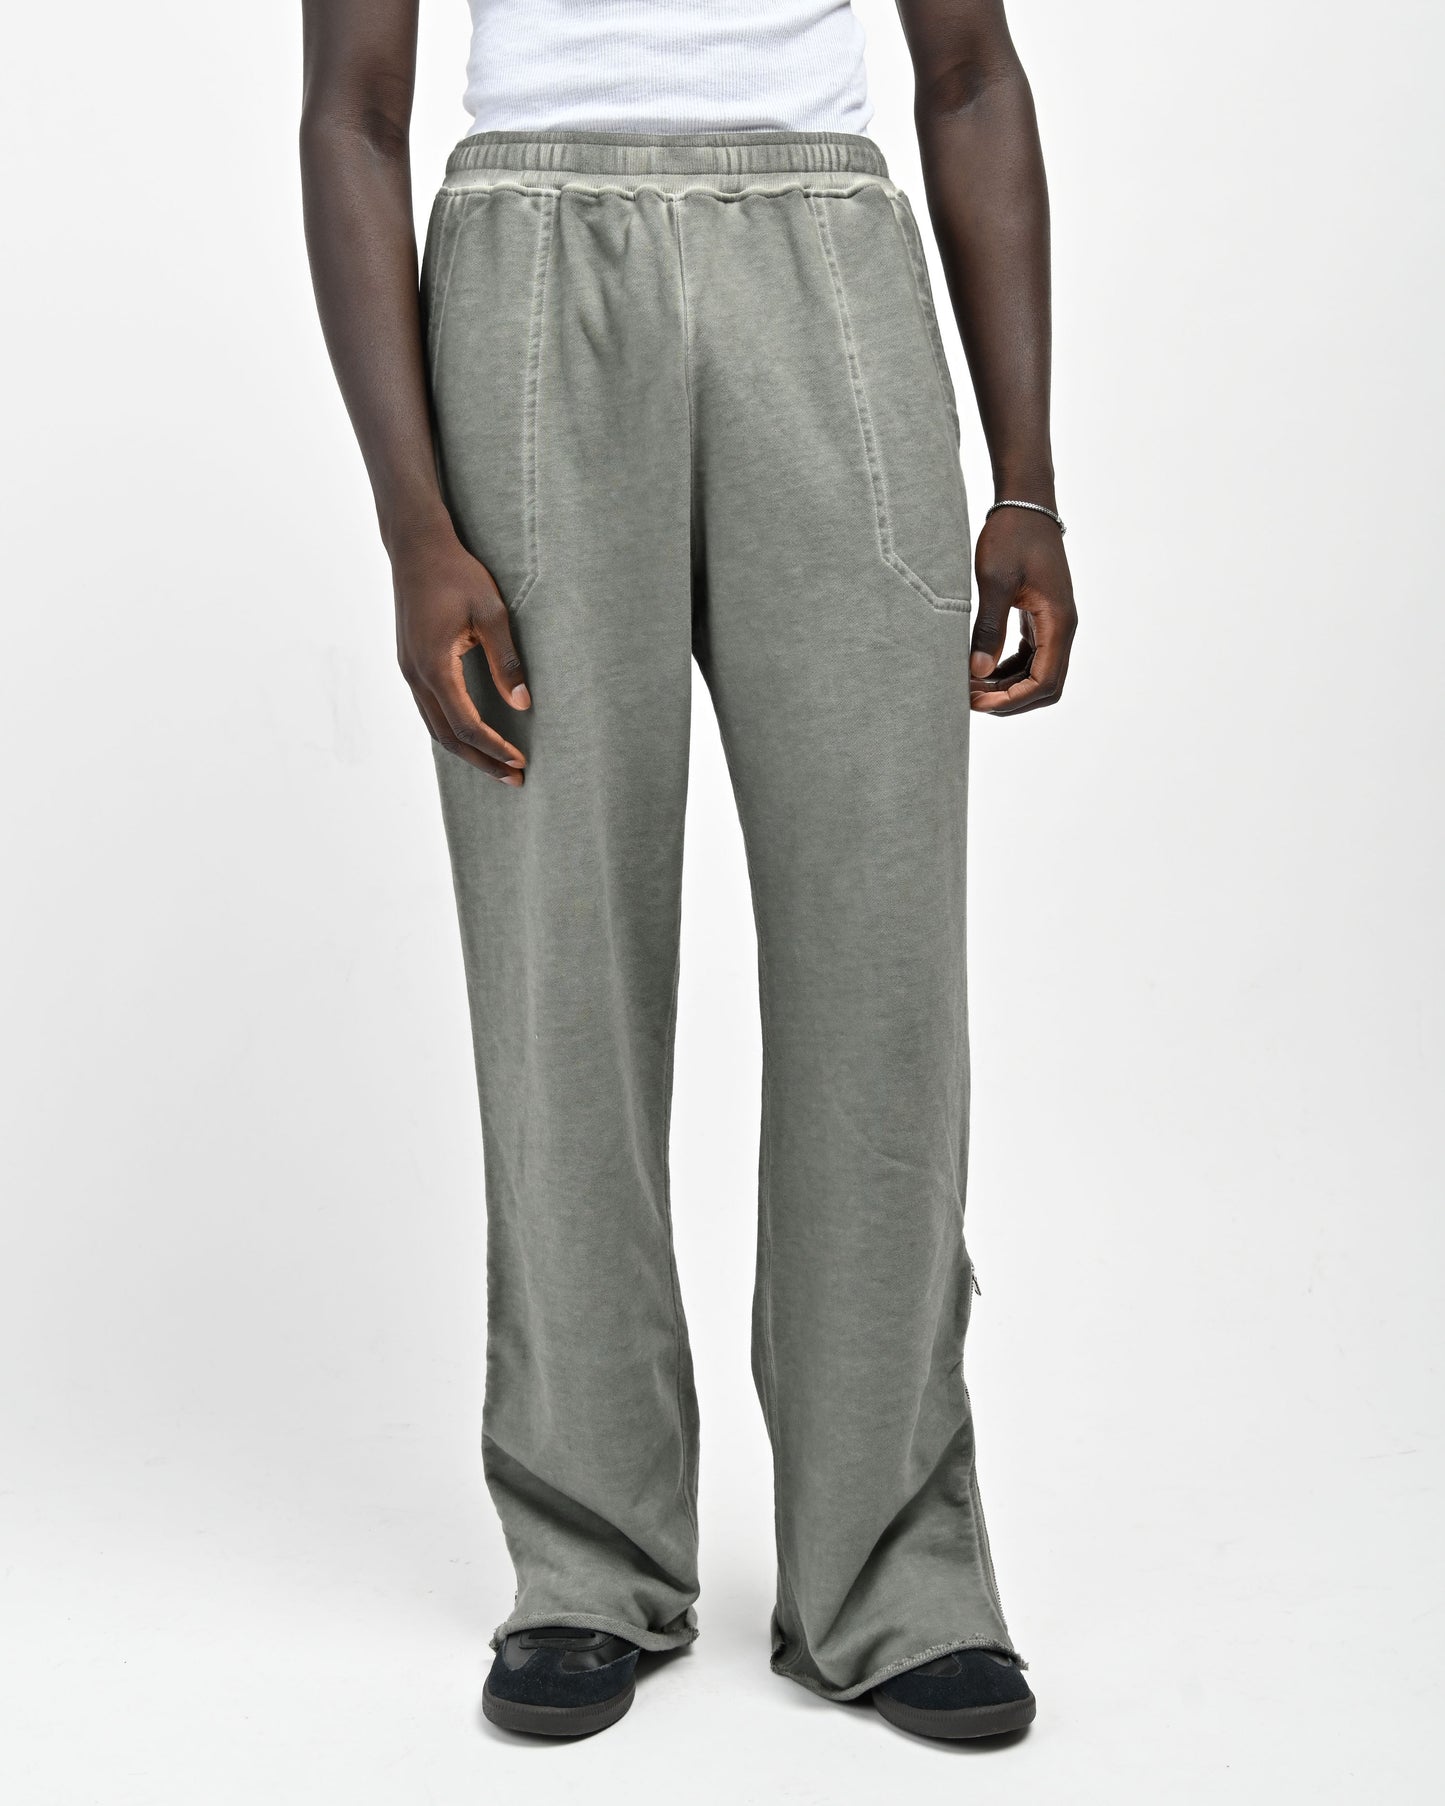 Front View of Model in Allora Track Pants in Muted Green by Aseye Studio